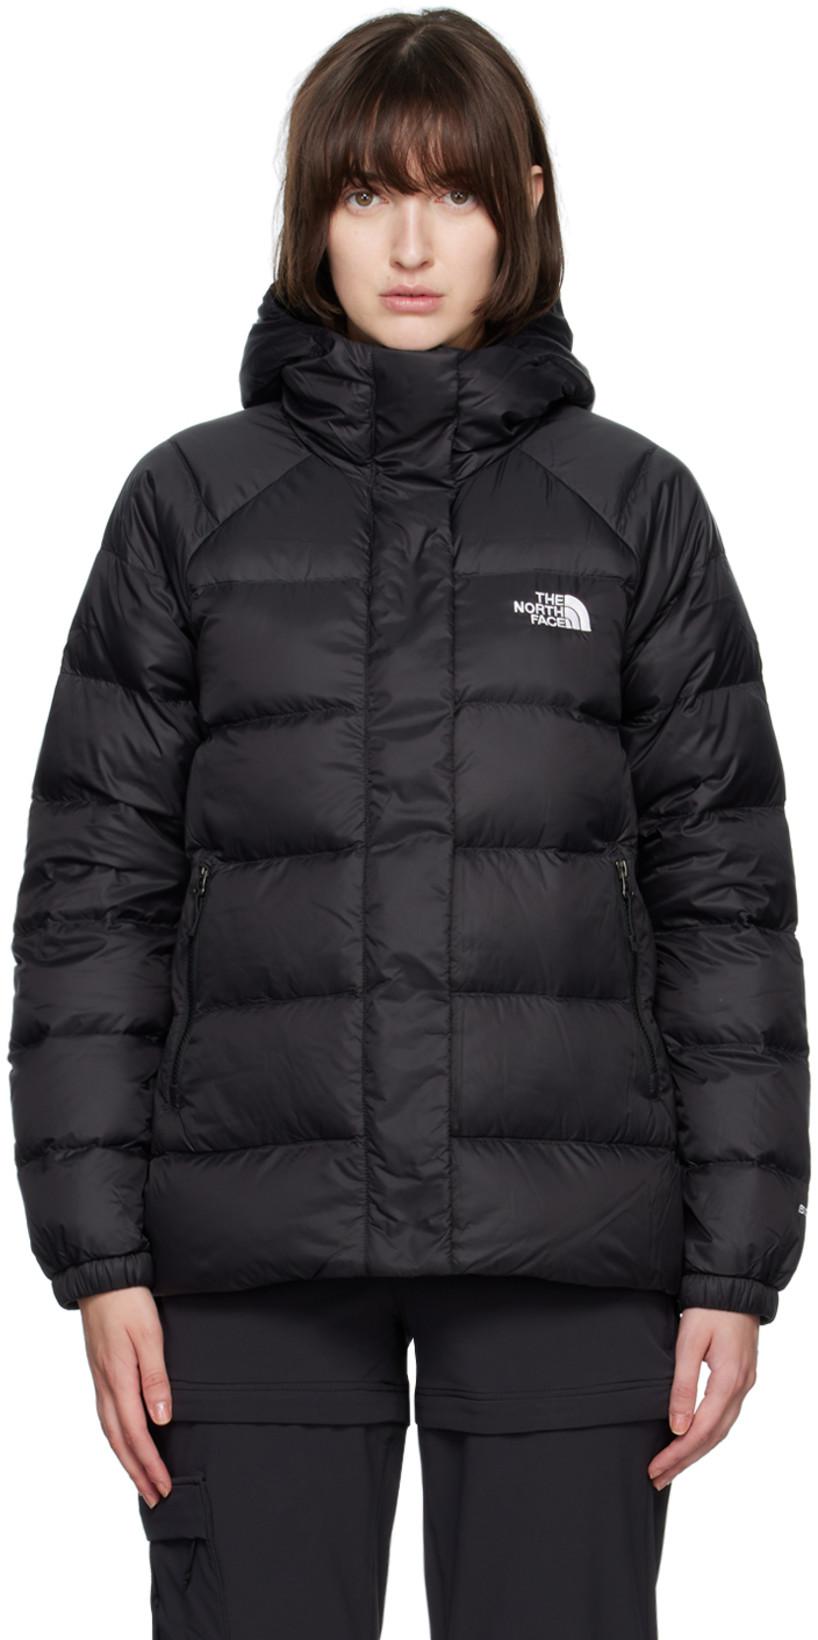 Black Hydrenalite Down Jacket by THE NORTH FACE | jellibeans